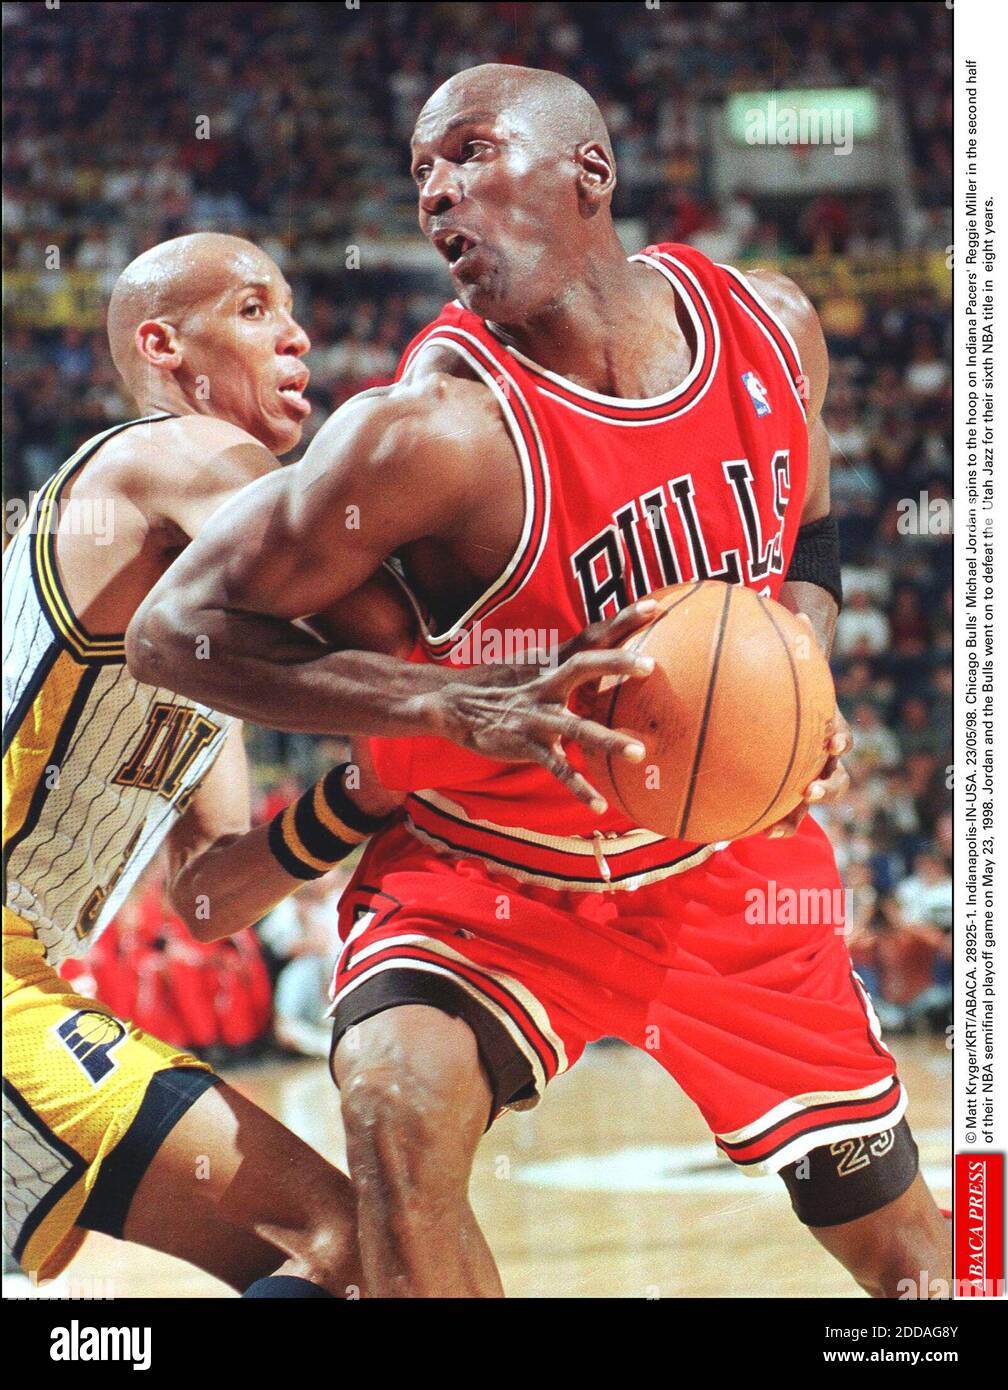 NO FILM, NO VIDEO, NO TV, NO DOCUMENTARY - © Matt Kryger/KRT/ABACA. 28925-1. Indianapolis-IN-USA. 23/05/98. Chicago Bulls' Michael Jordan spins to the hoop on Indiana Pacers' Reggie Miller in the second half of their NBA semifinal playoff game on May 23, 1998. Jordan and the Bulls went on to defea Stock Photo